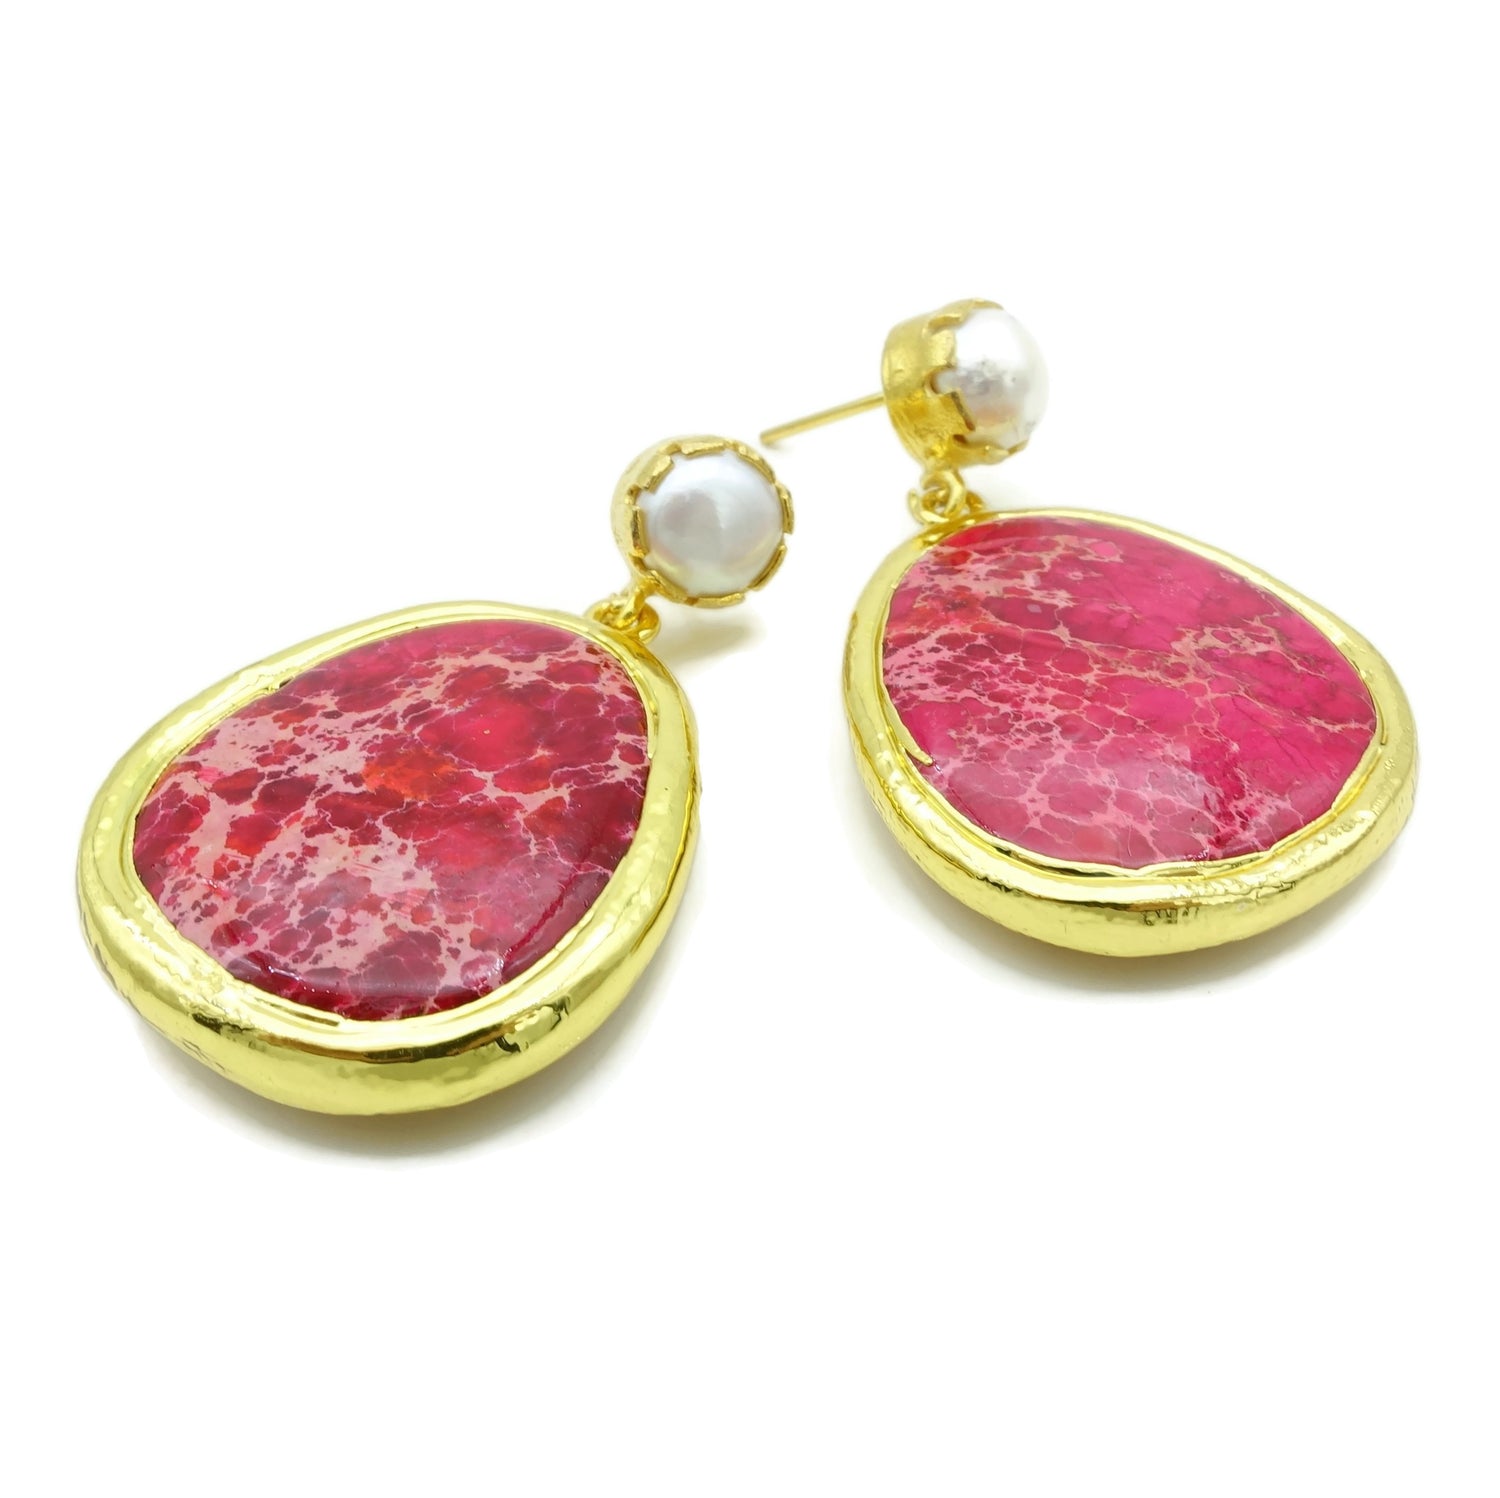 Aylas Magnesite earrings - 21ct Gold plated semi precious gemstone - Handmade in Ottoman Style by Artisan